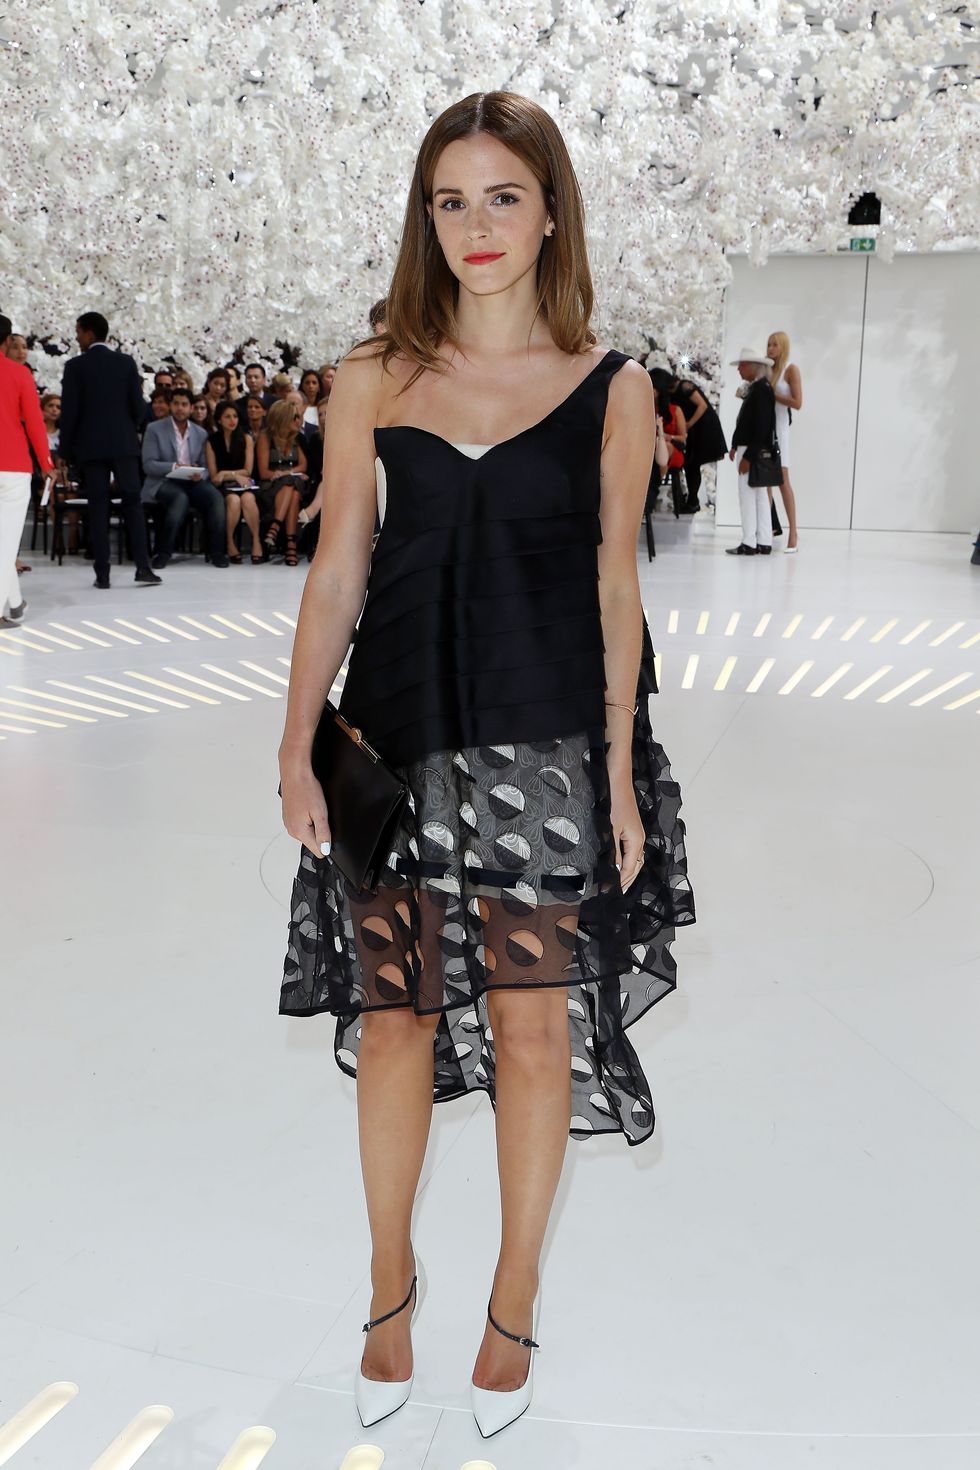 At the Dior show during fashion week Emma Watsons sexy outfit was prominently displayed.